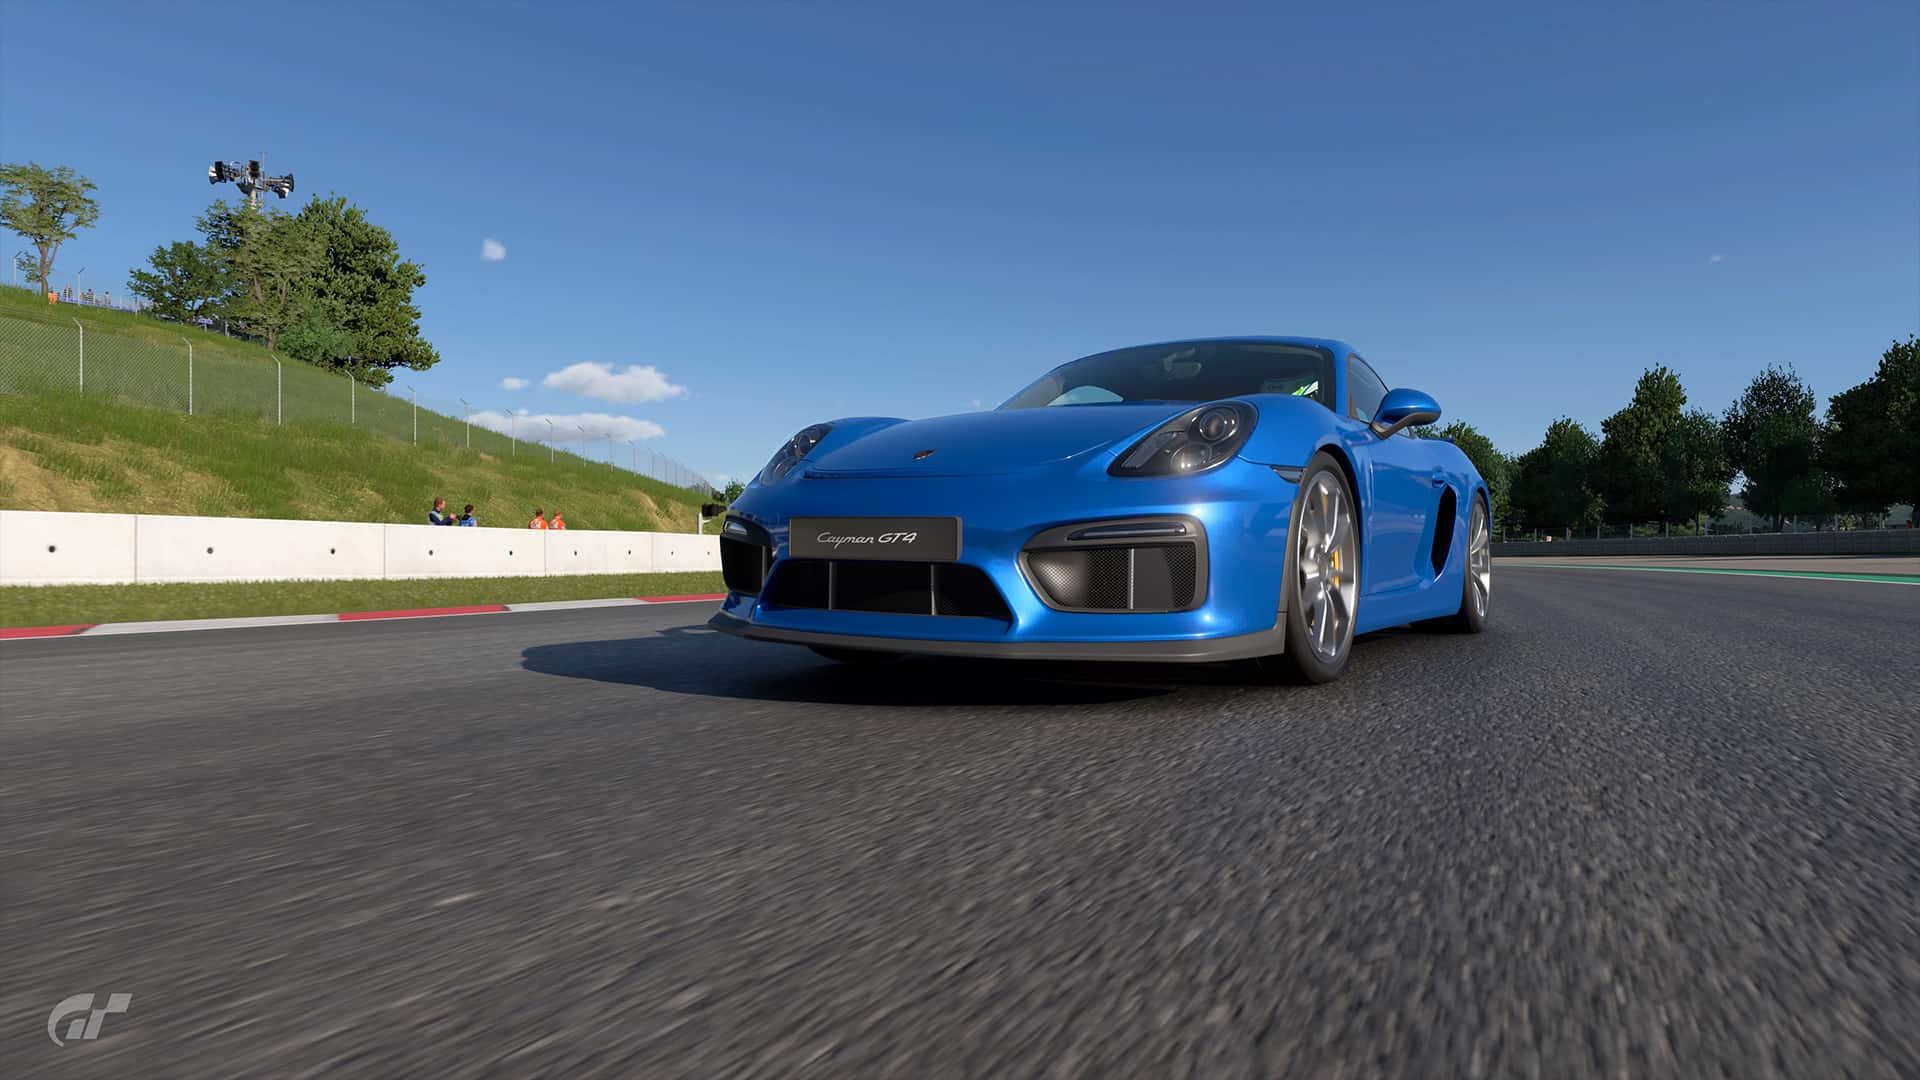 Gran Turismo 7: How to Claim Pre-Order and Deluxe Edition DLC